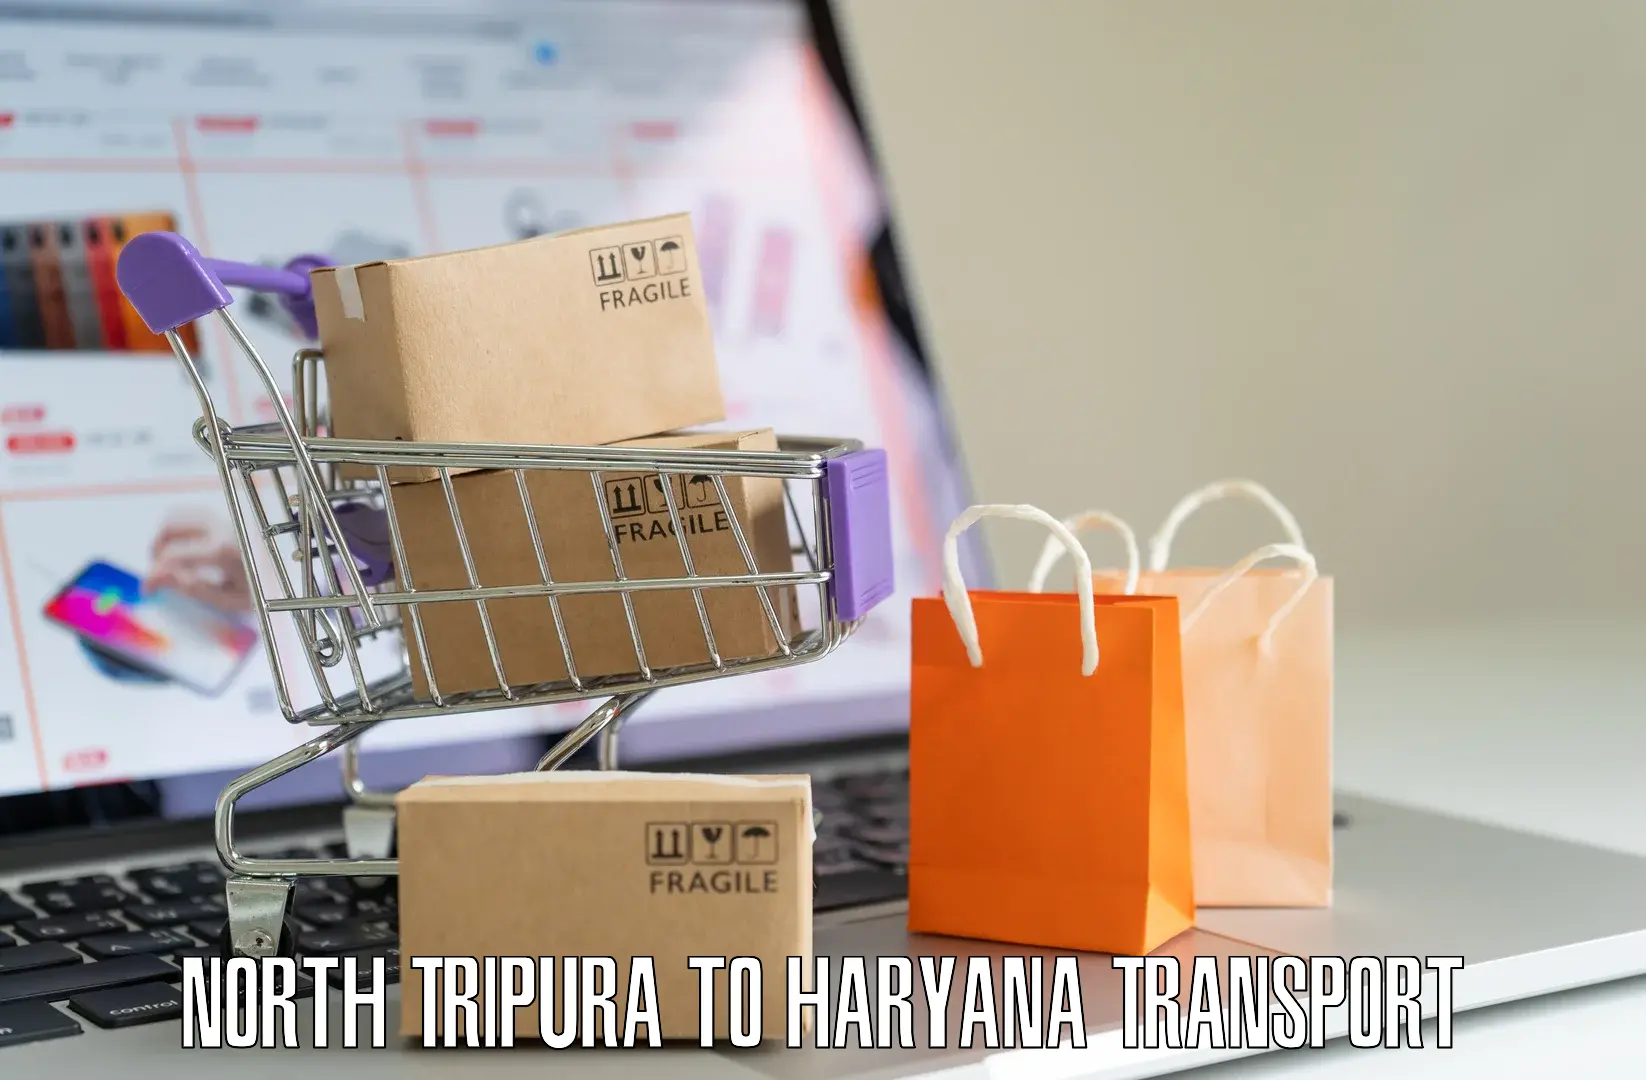 Daily parcel service transport in North Tripura to Rohtak